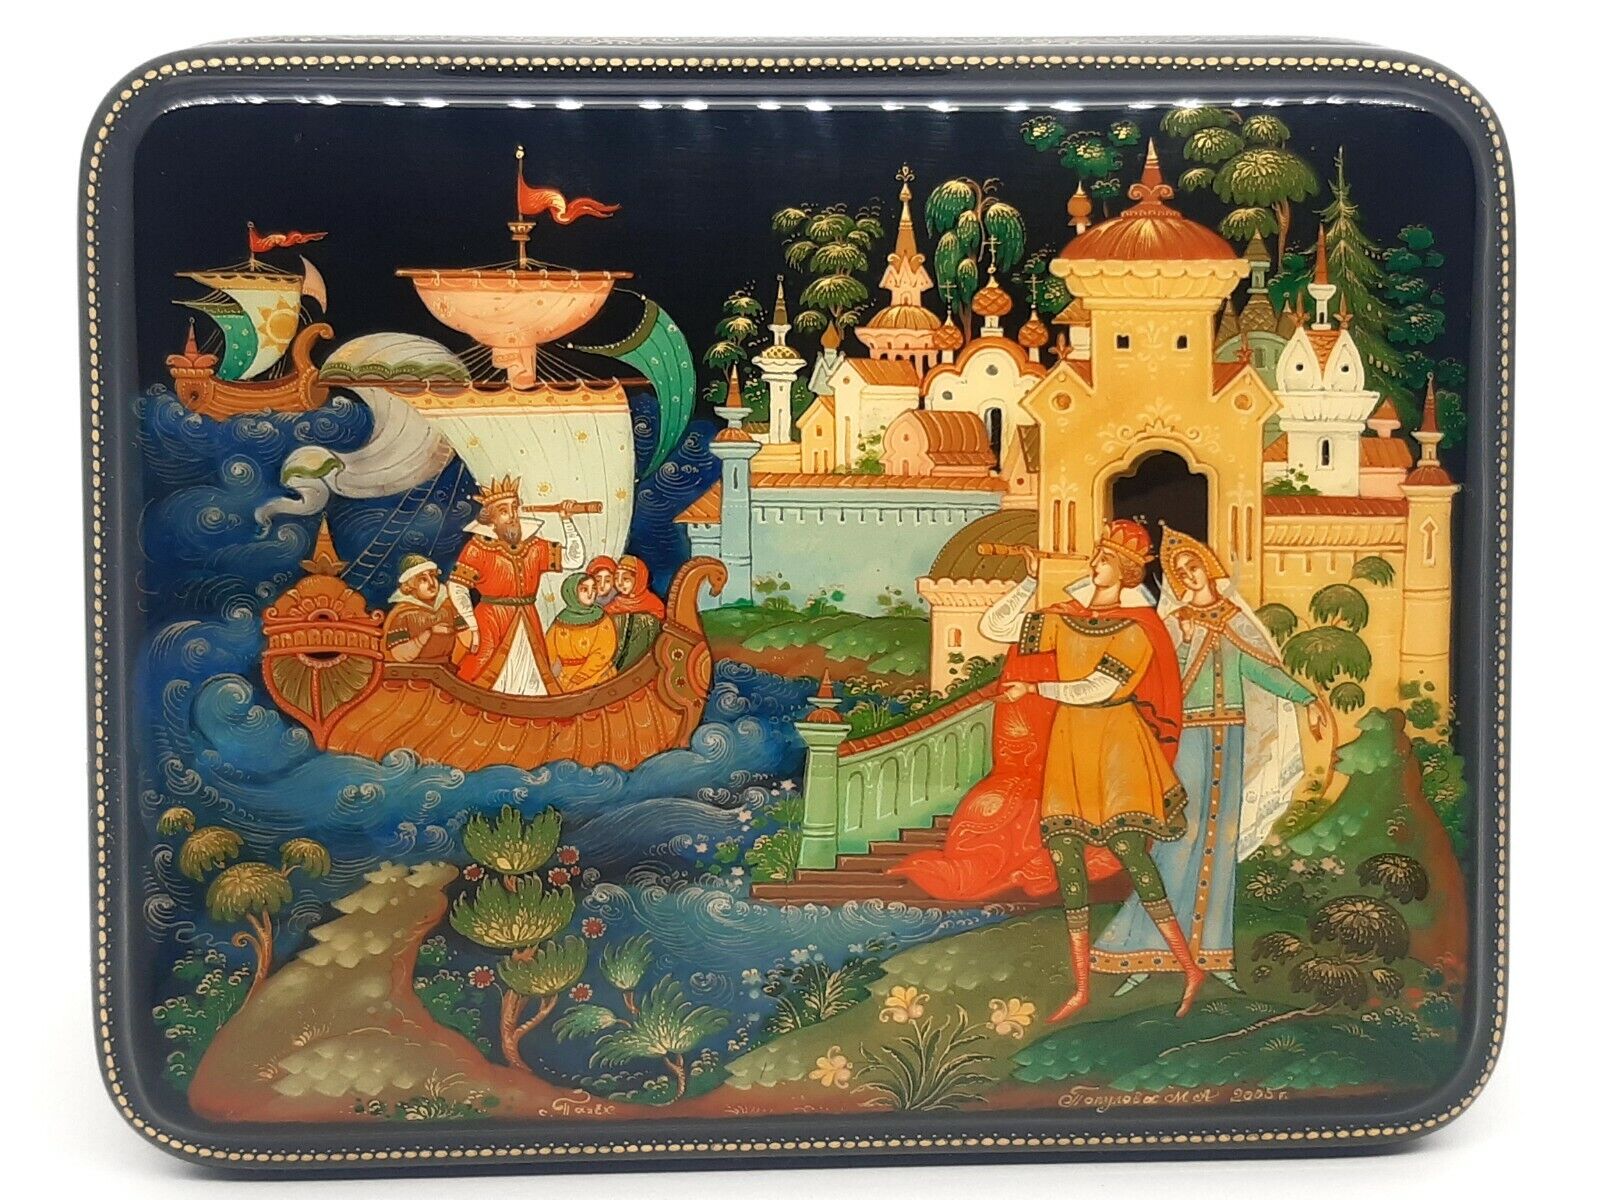 Palekh Lacquer Miniature Russian Box - Princess the Swank by Populovy (2005)